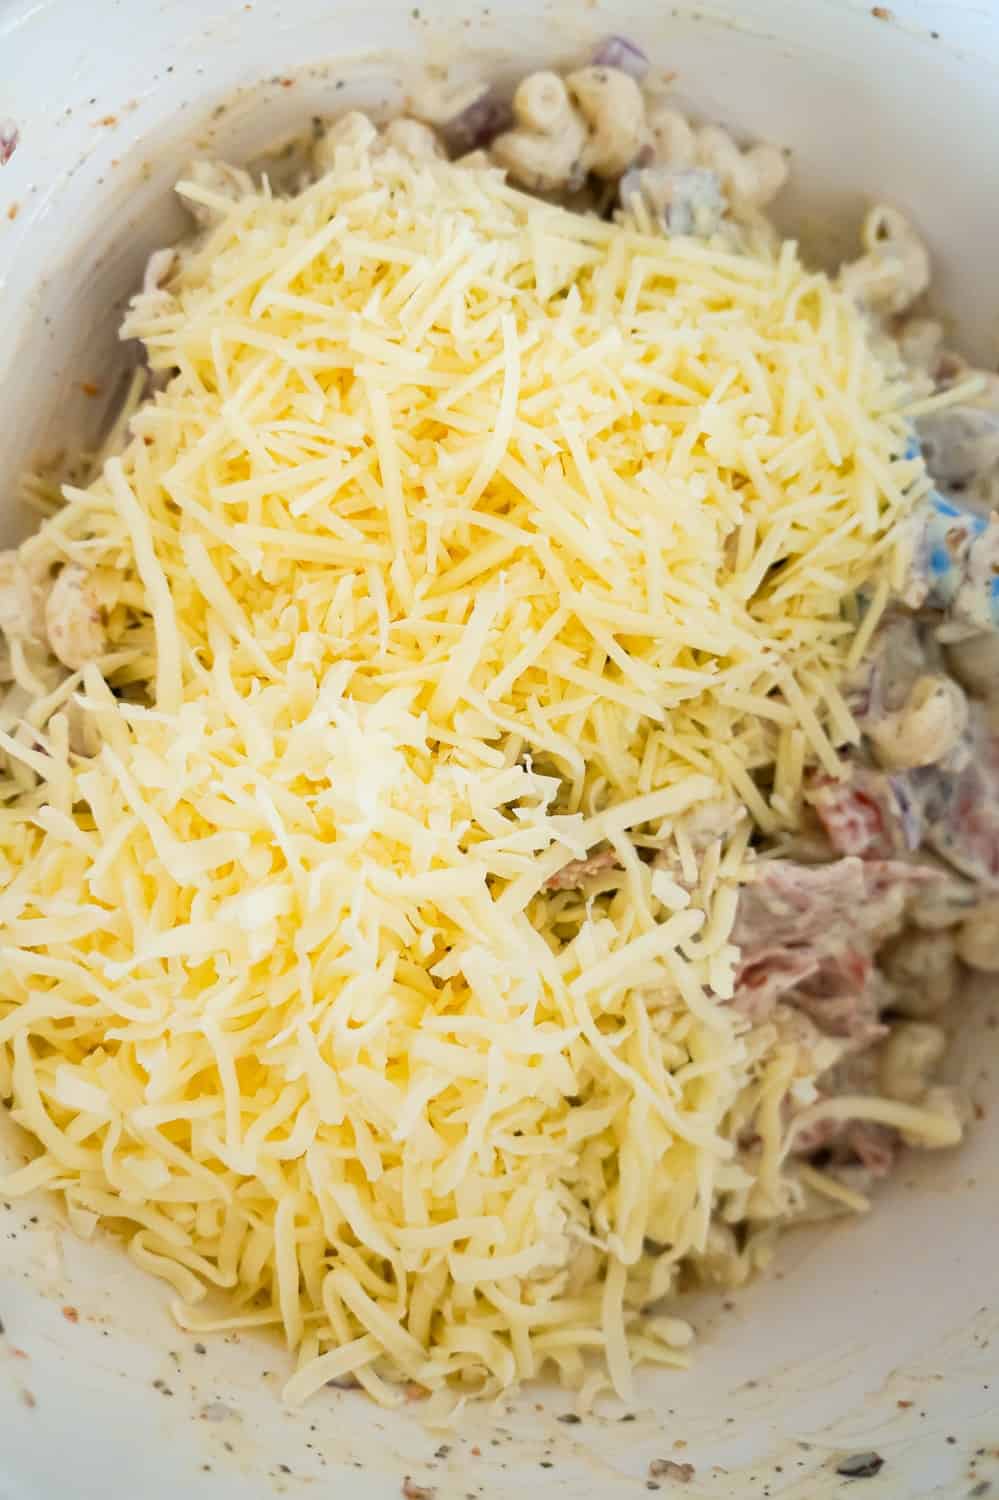 shredded Parmesan cheese and shredded mozzarella cheese on top of pasta salad